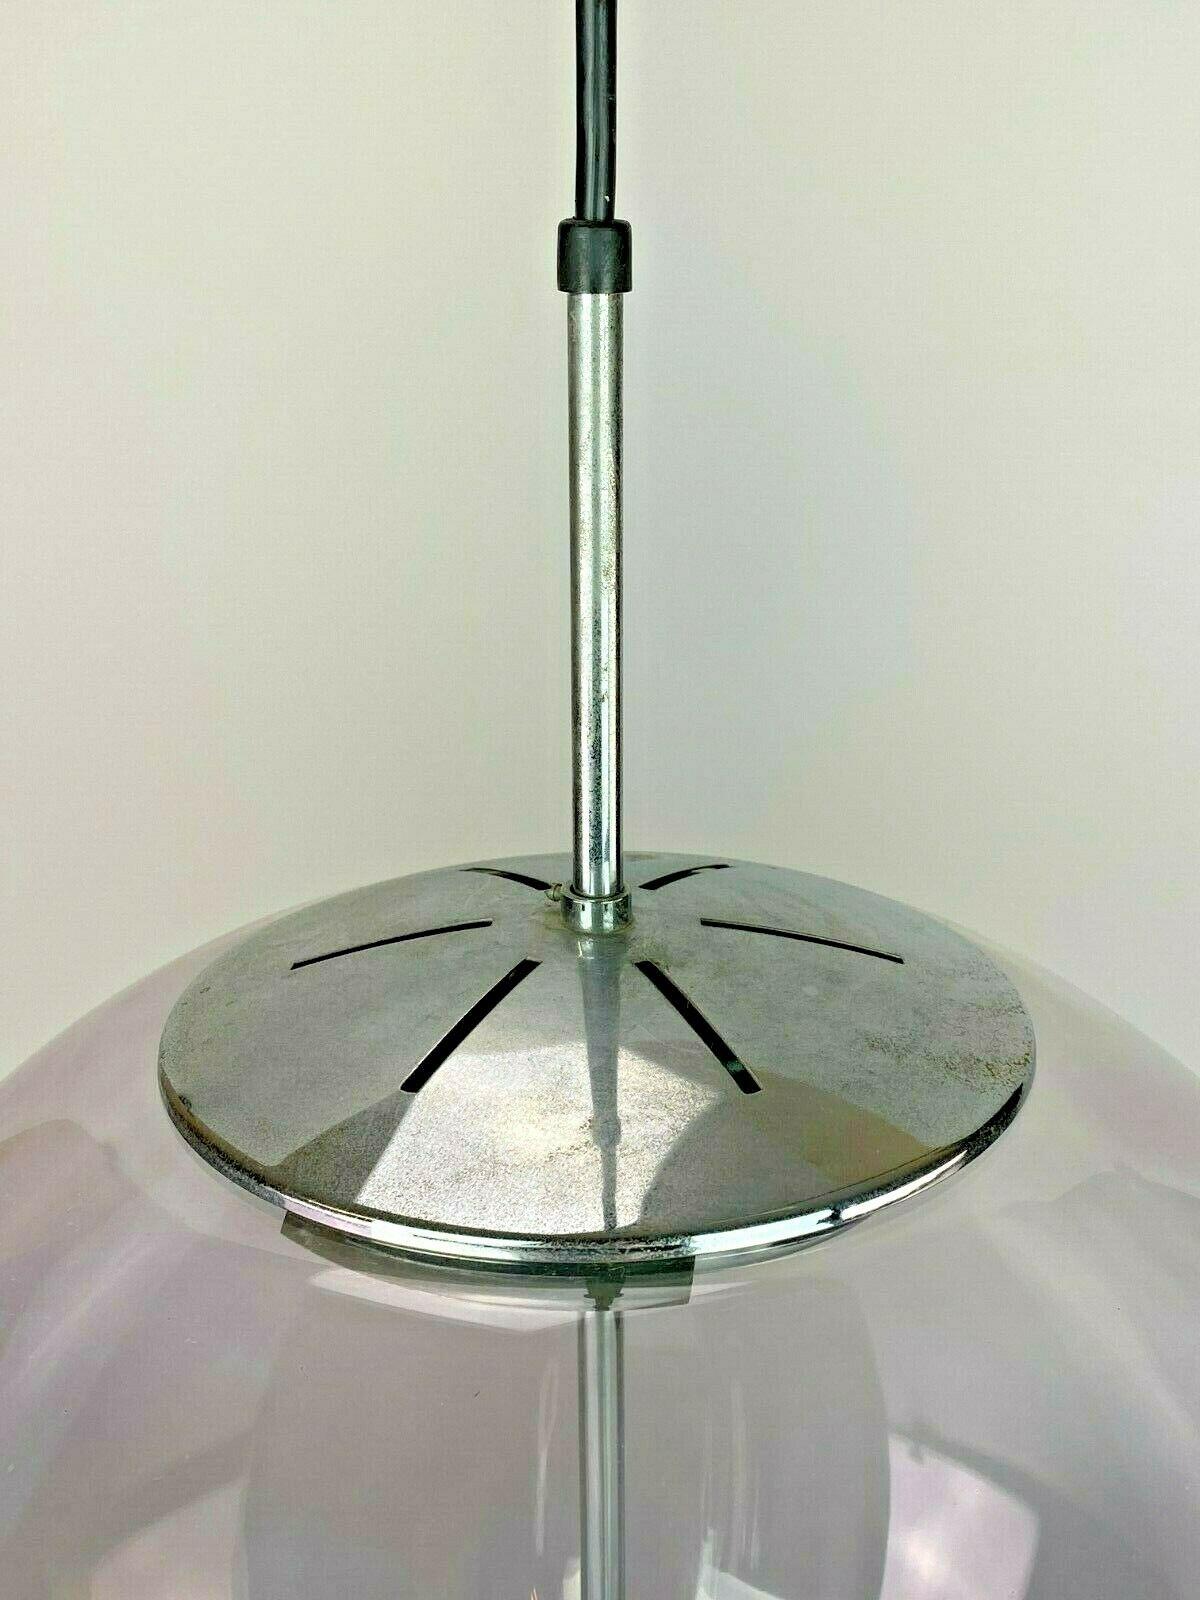 XXL 60s 70s Lamp Light Ceiling Lamp Limburg Spherical Lamp Ball Design In Good Condition For Sale In Neuenkirchen, NI